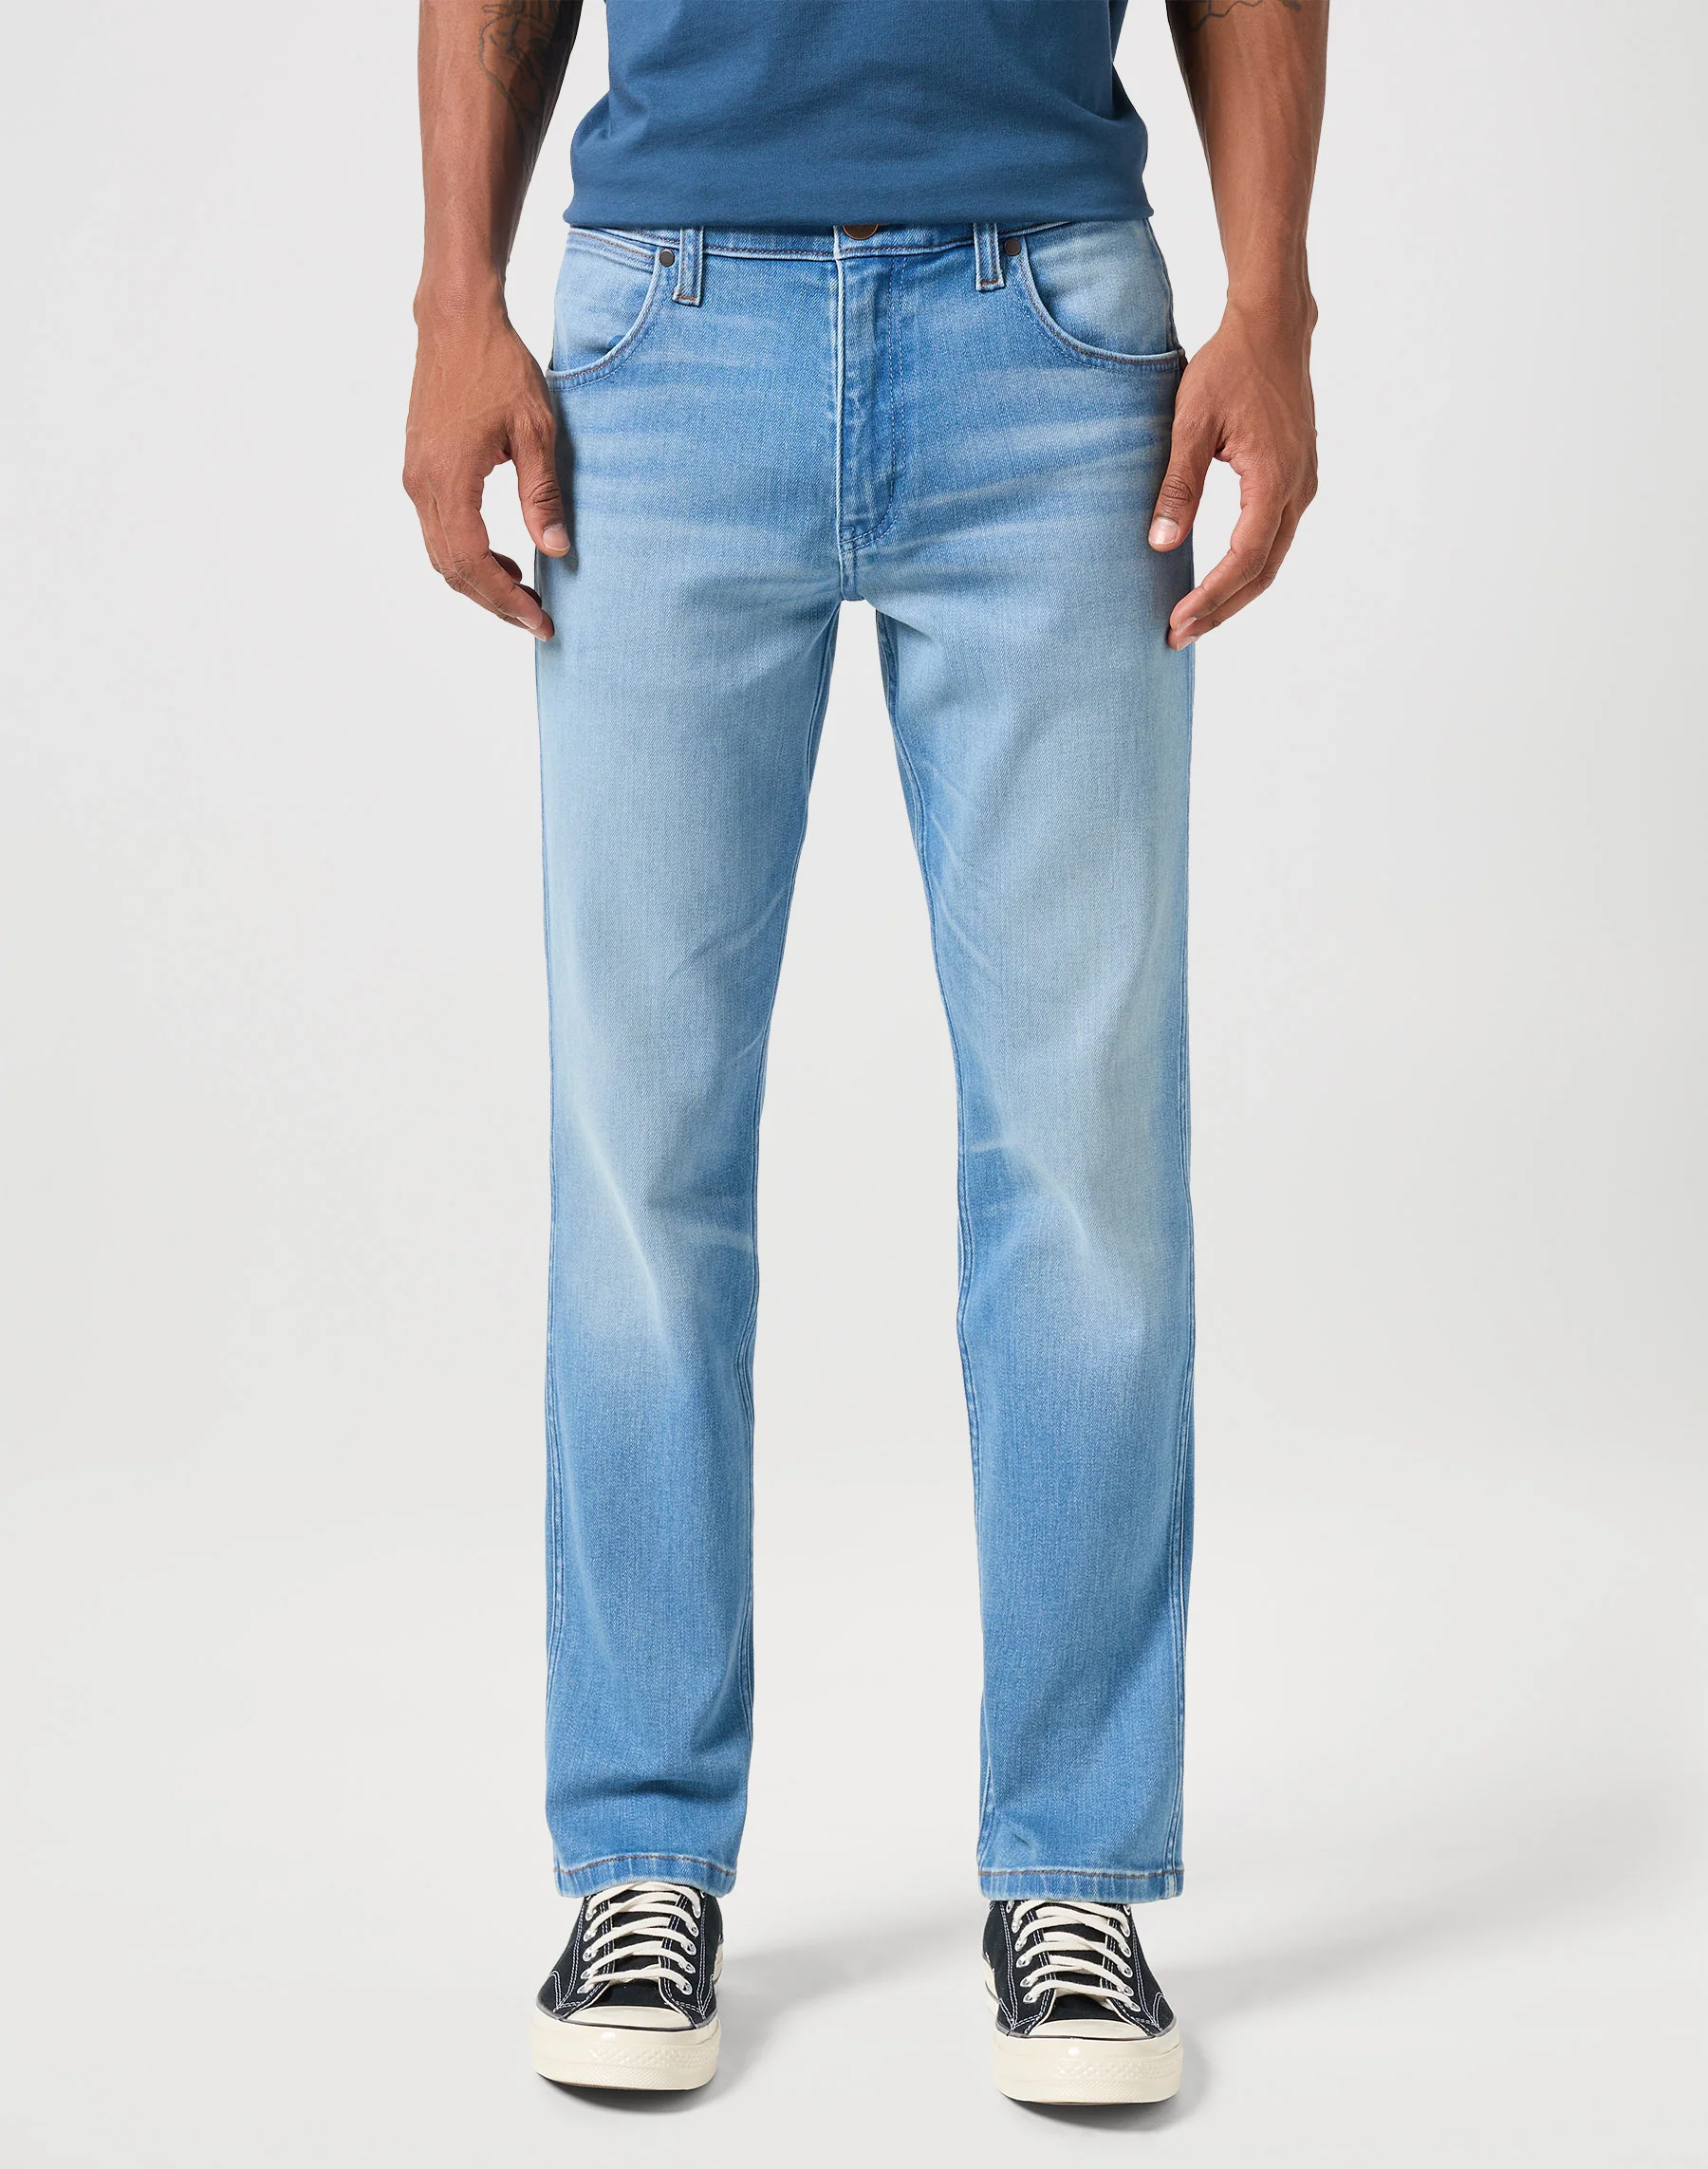 Wrangler 5-Pocket-Jeans GREENSBORO FREE TO STRETCH Free to stretch material